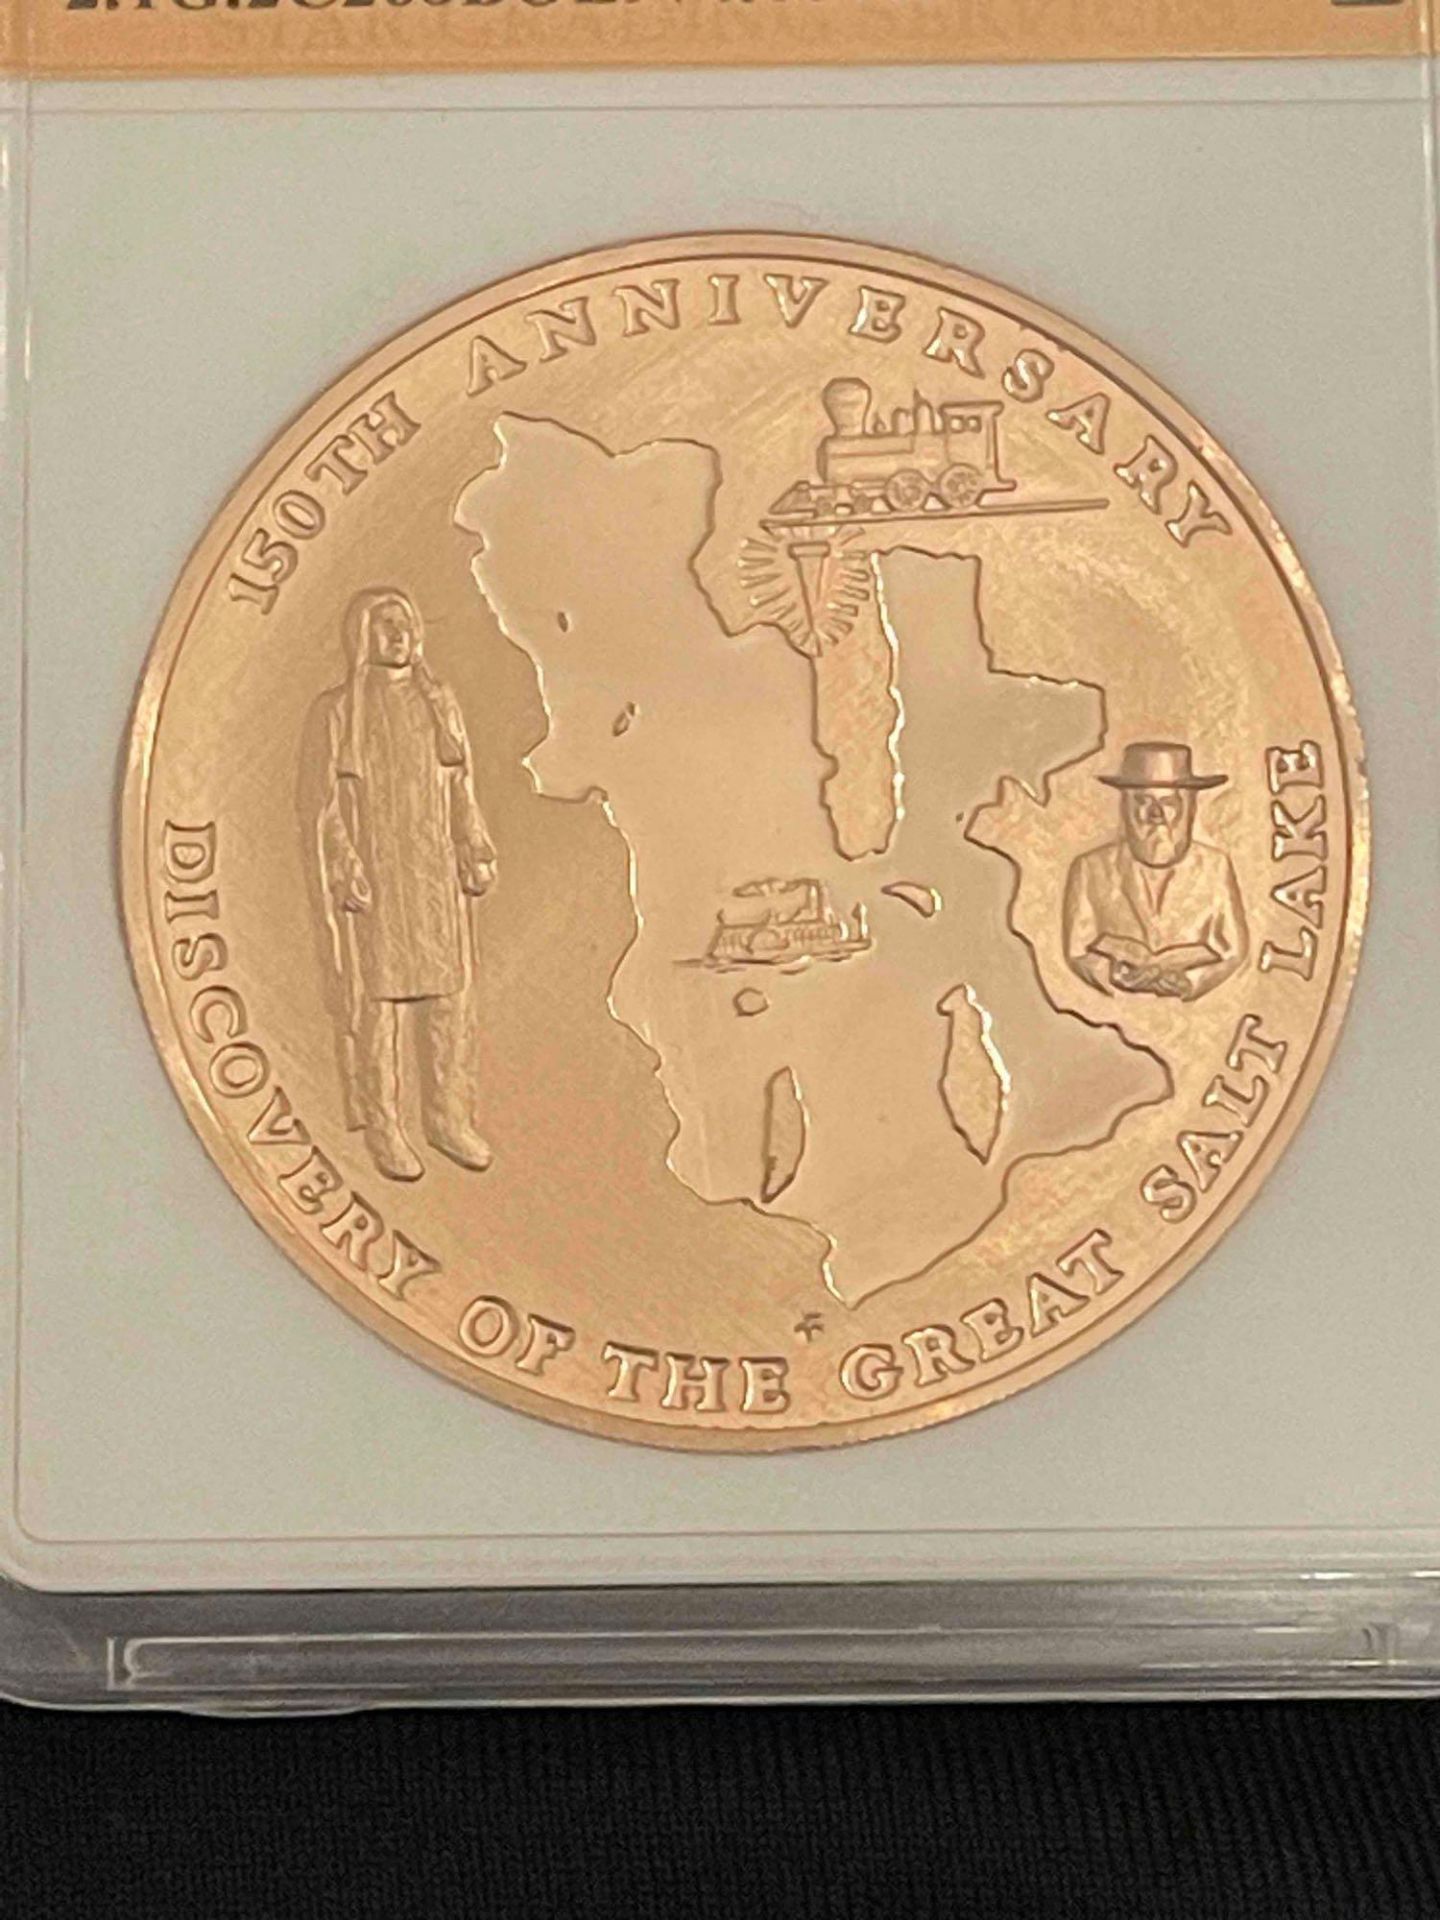 1974 Discovery of Great Salt Lake Coin - Image 2 of 3